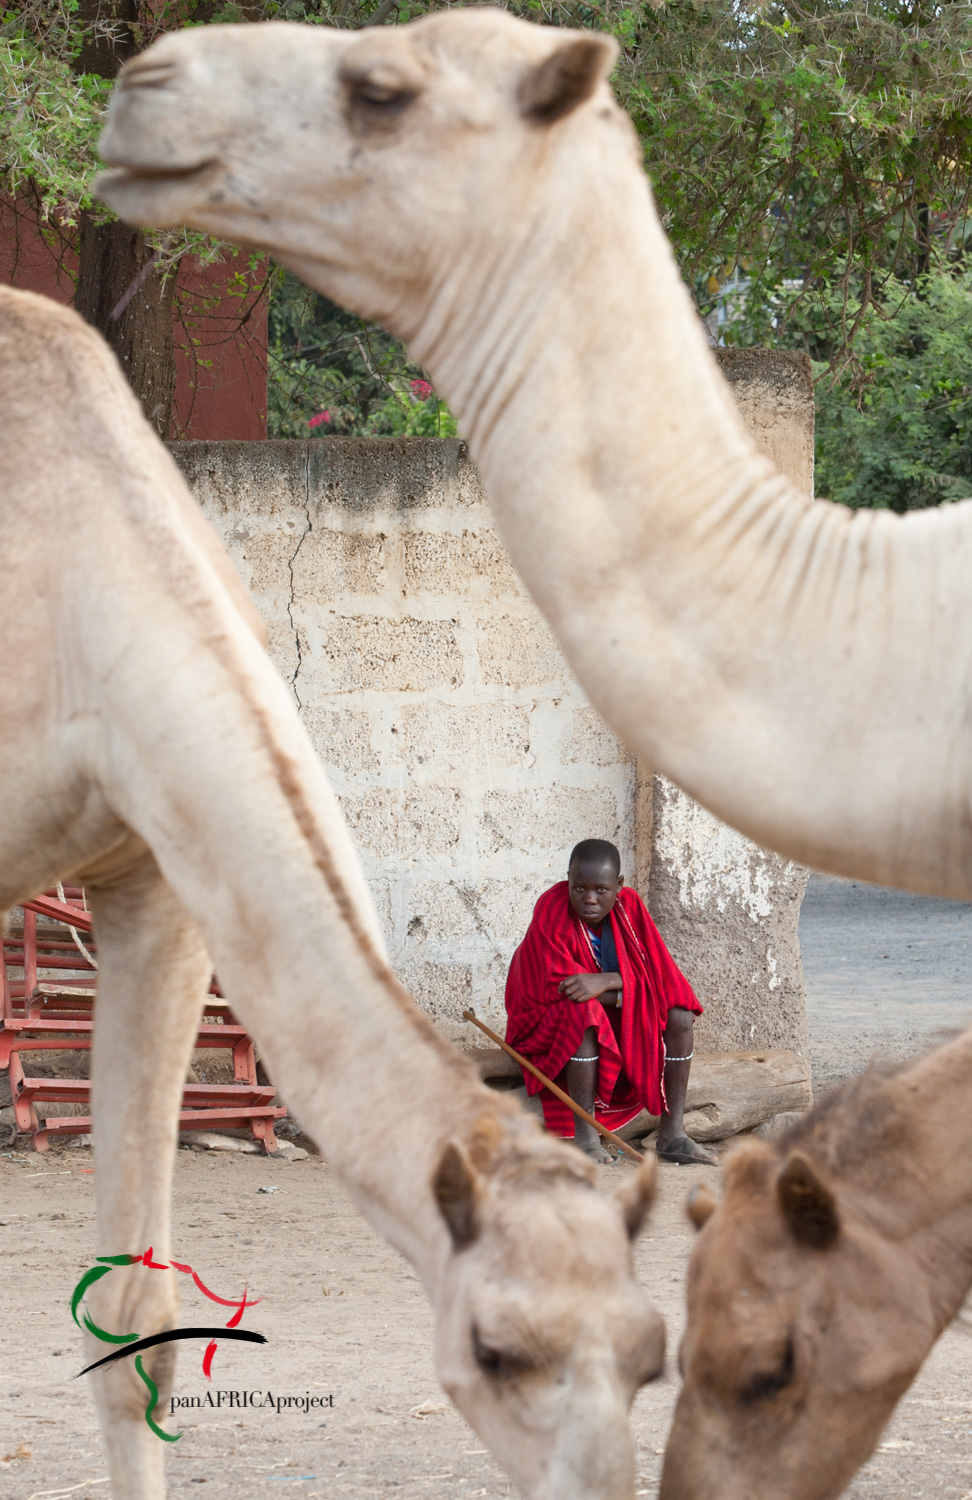 A man sitting behind camels